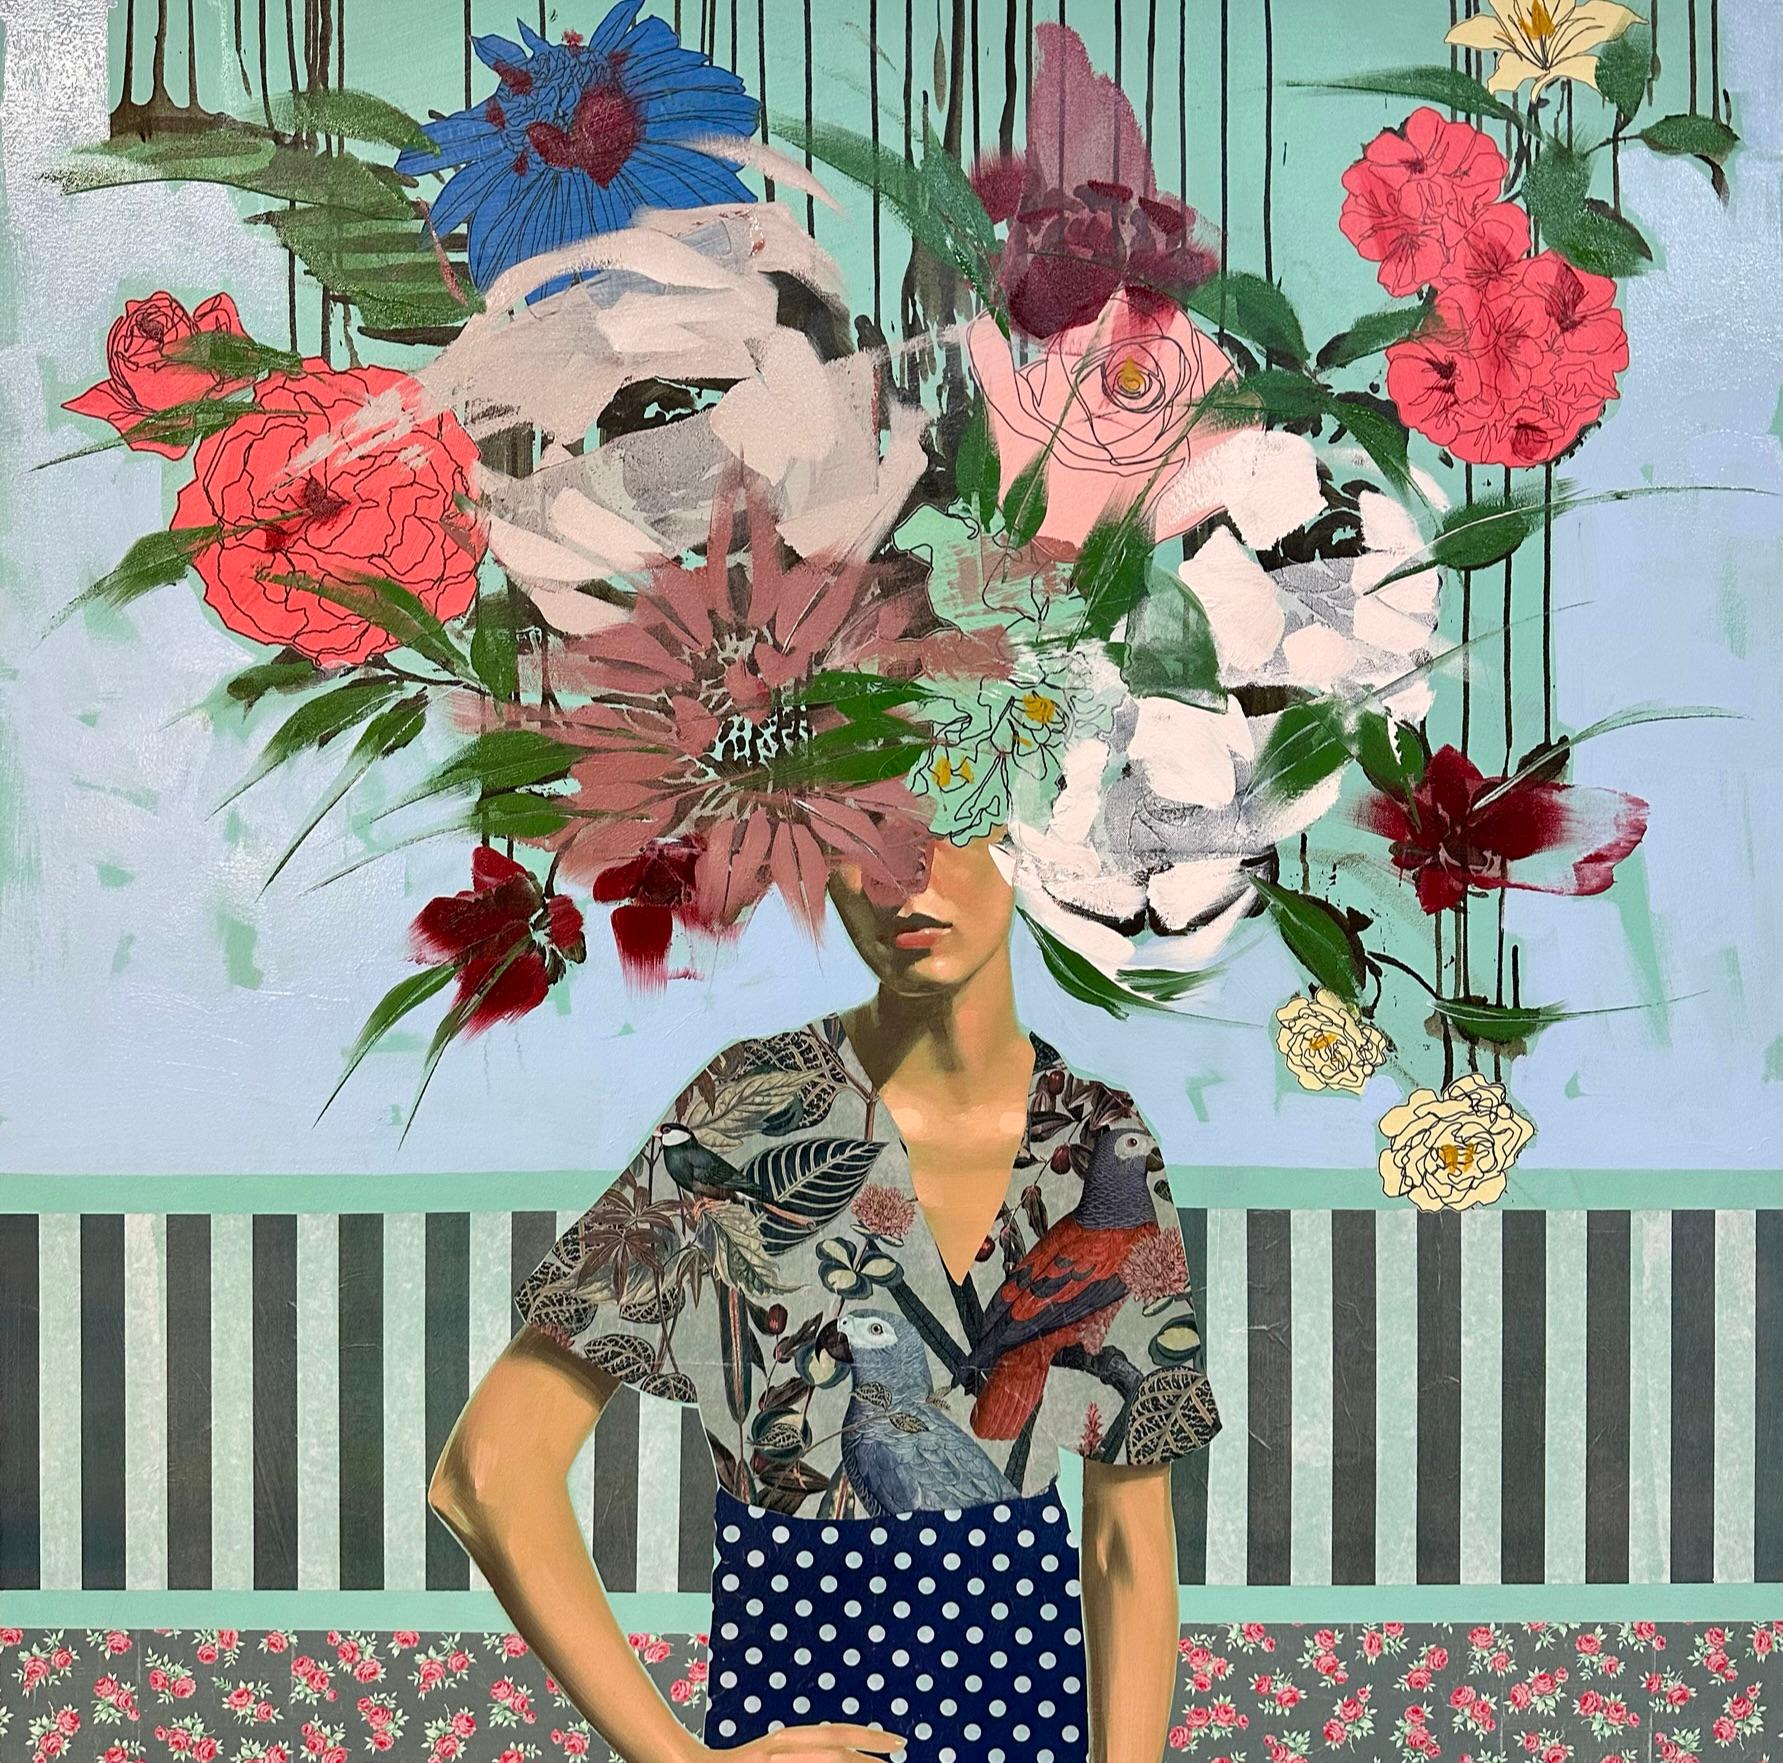 ANNA KINCAIDE
"Let It Grow"
Oil & Mixed Media on Canvas
48 x 48 inches

Communicating emotion and narrative with limited assistance from her figure’s facial expressions, Anna Kincaide creates cascades of flowers that cover her subjects to explore